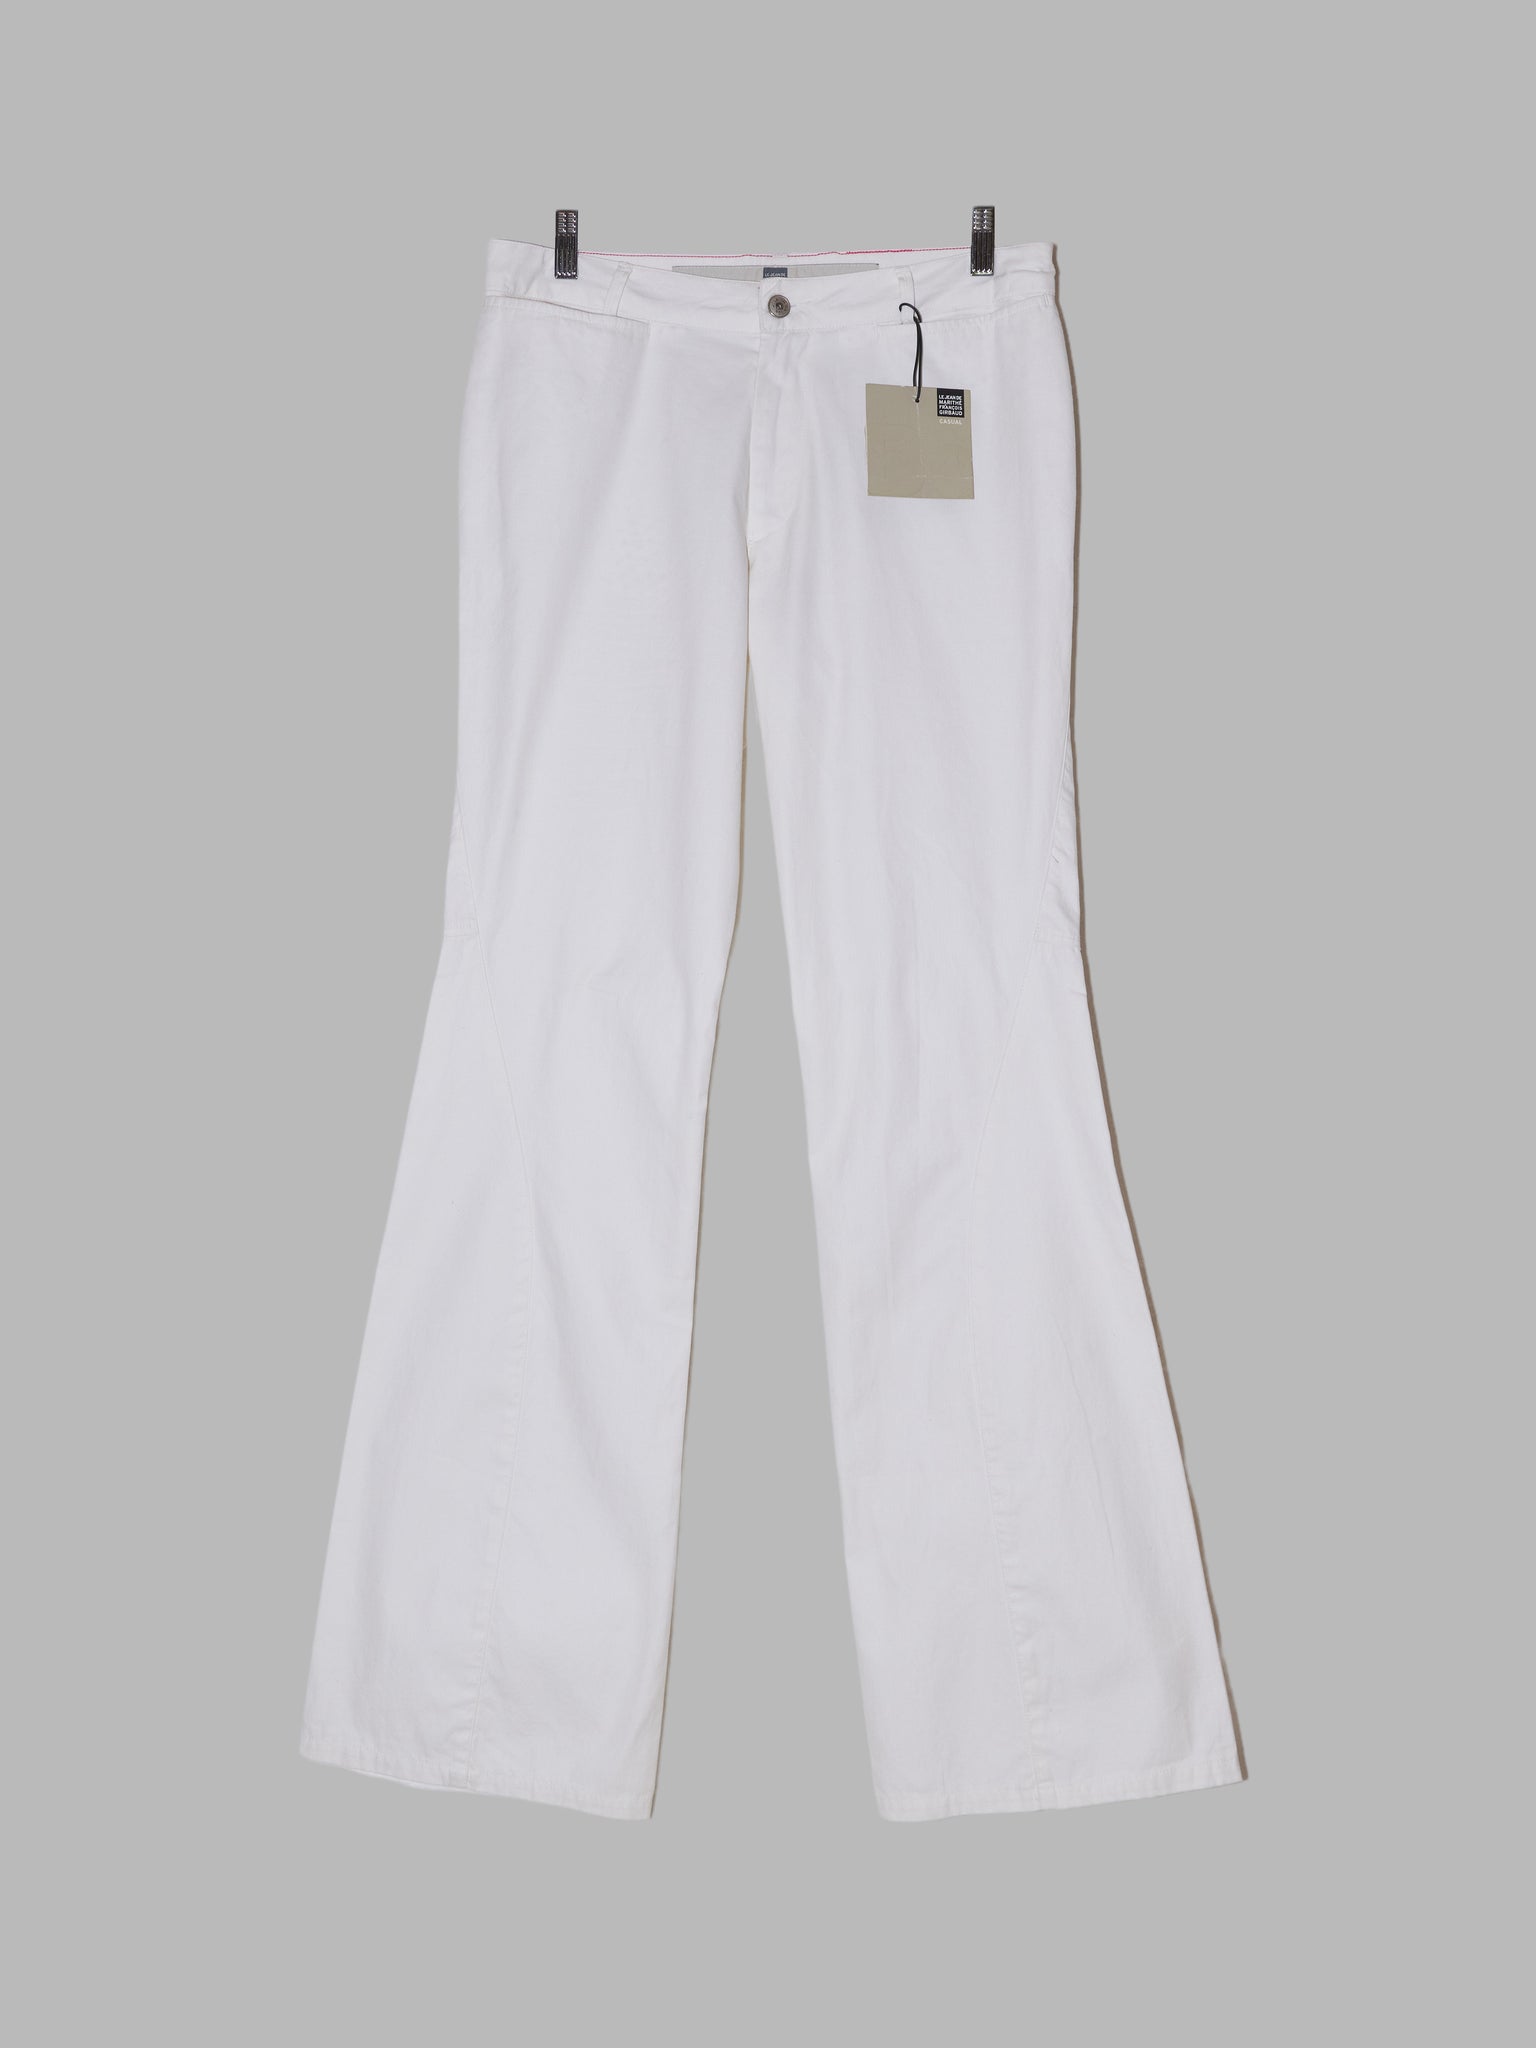 Le Jean de Marithe Francois Girbaud white cotton flared chinos - size 48 32